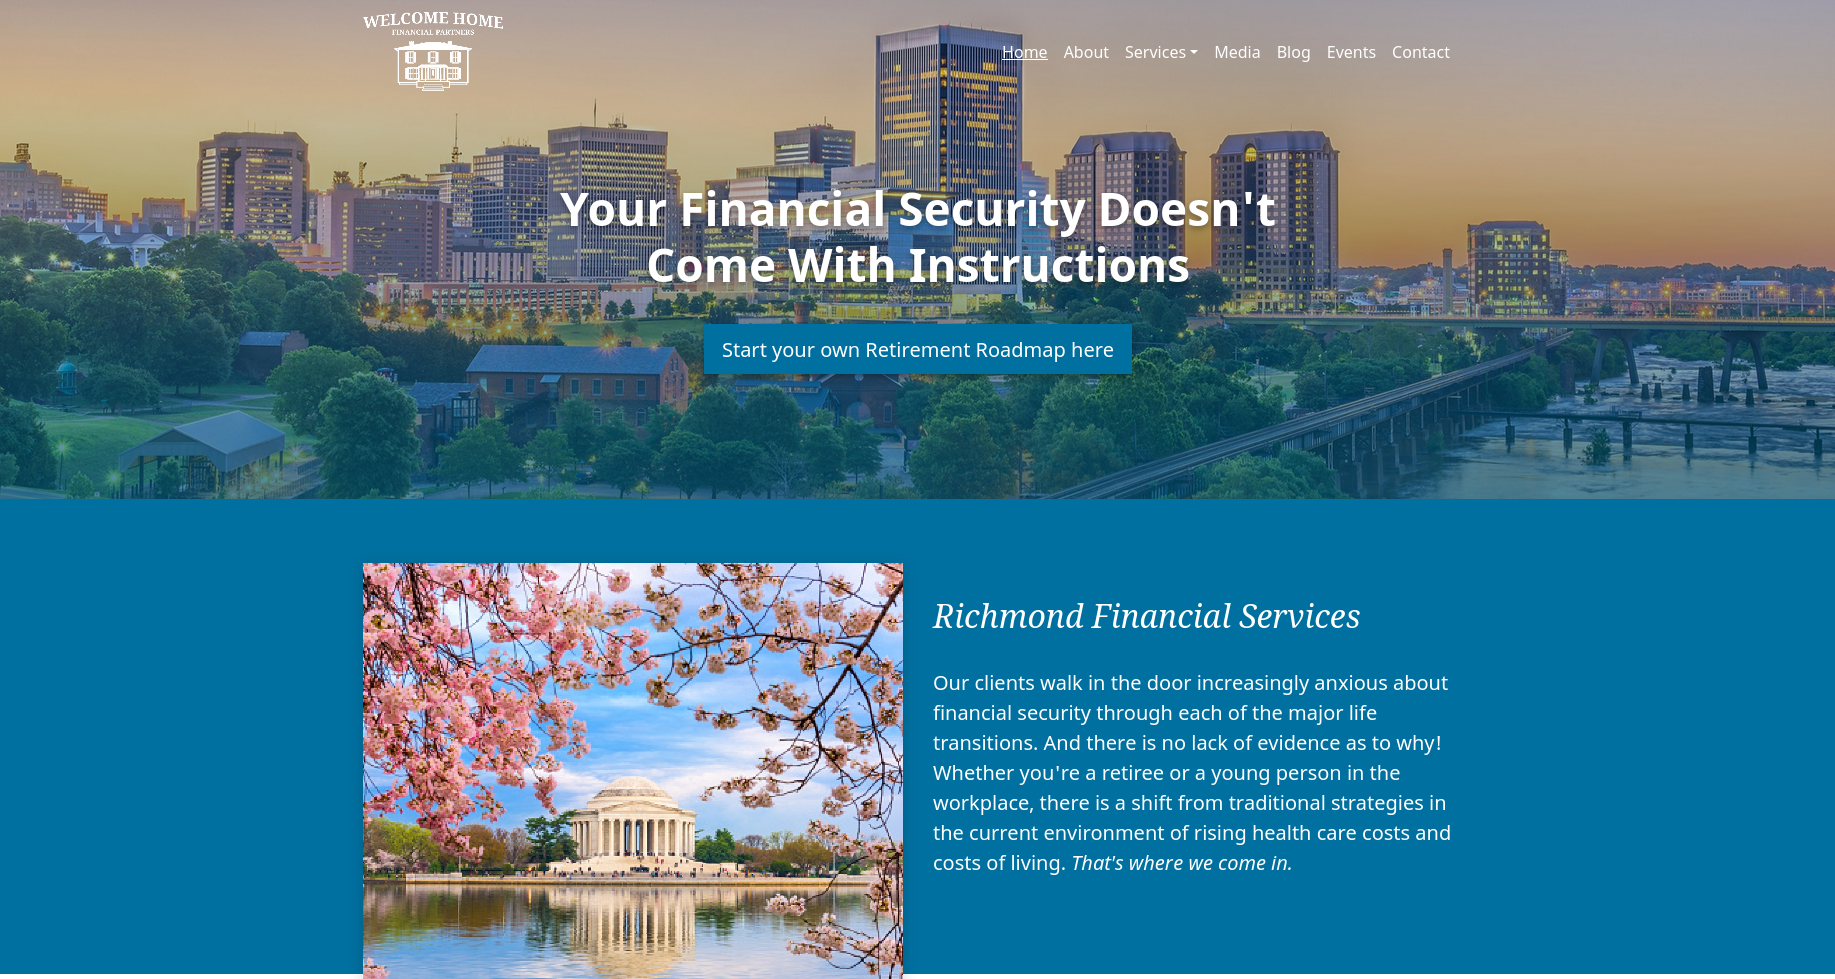 Richmond_Financial_Services_Financial_Professionals_Welcome_Home_Financial_Partners.png